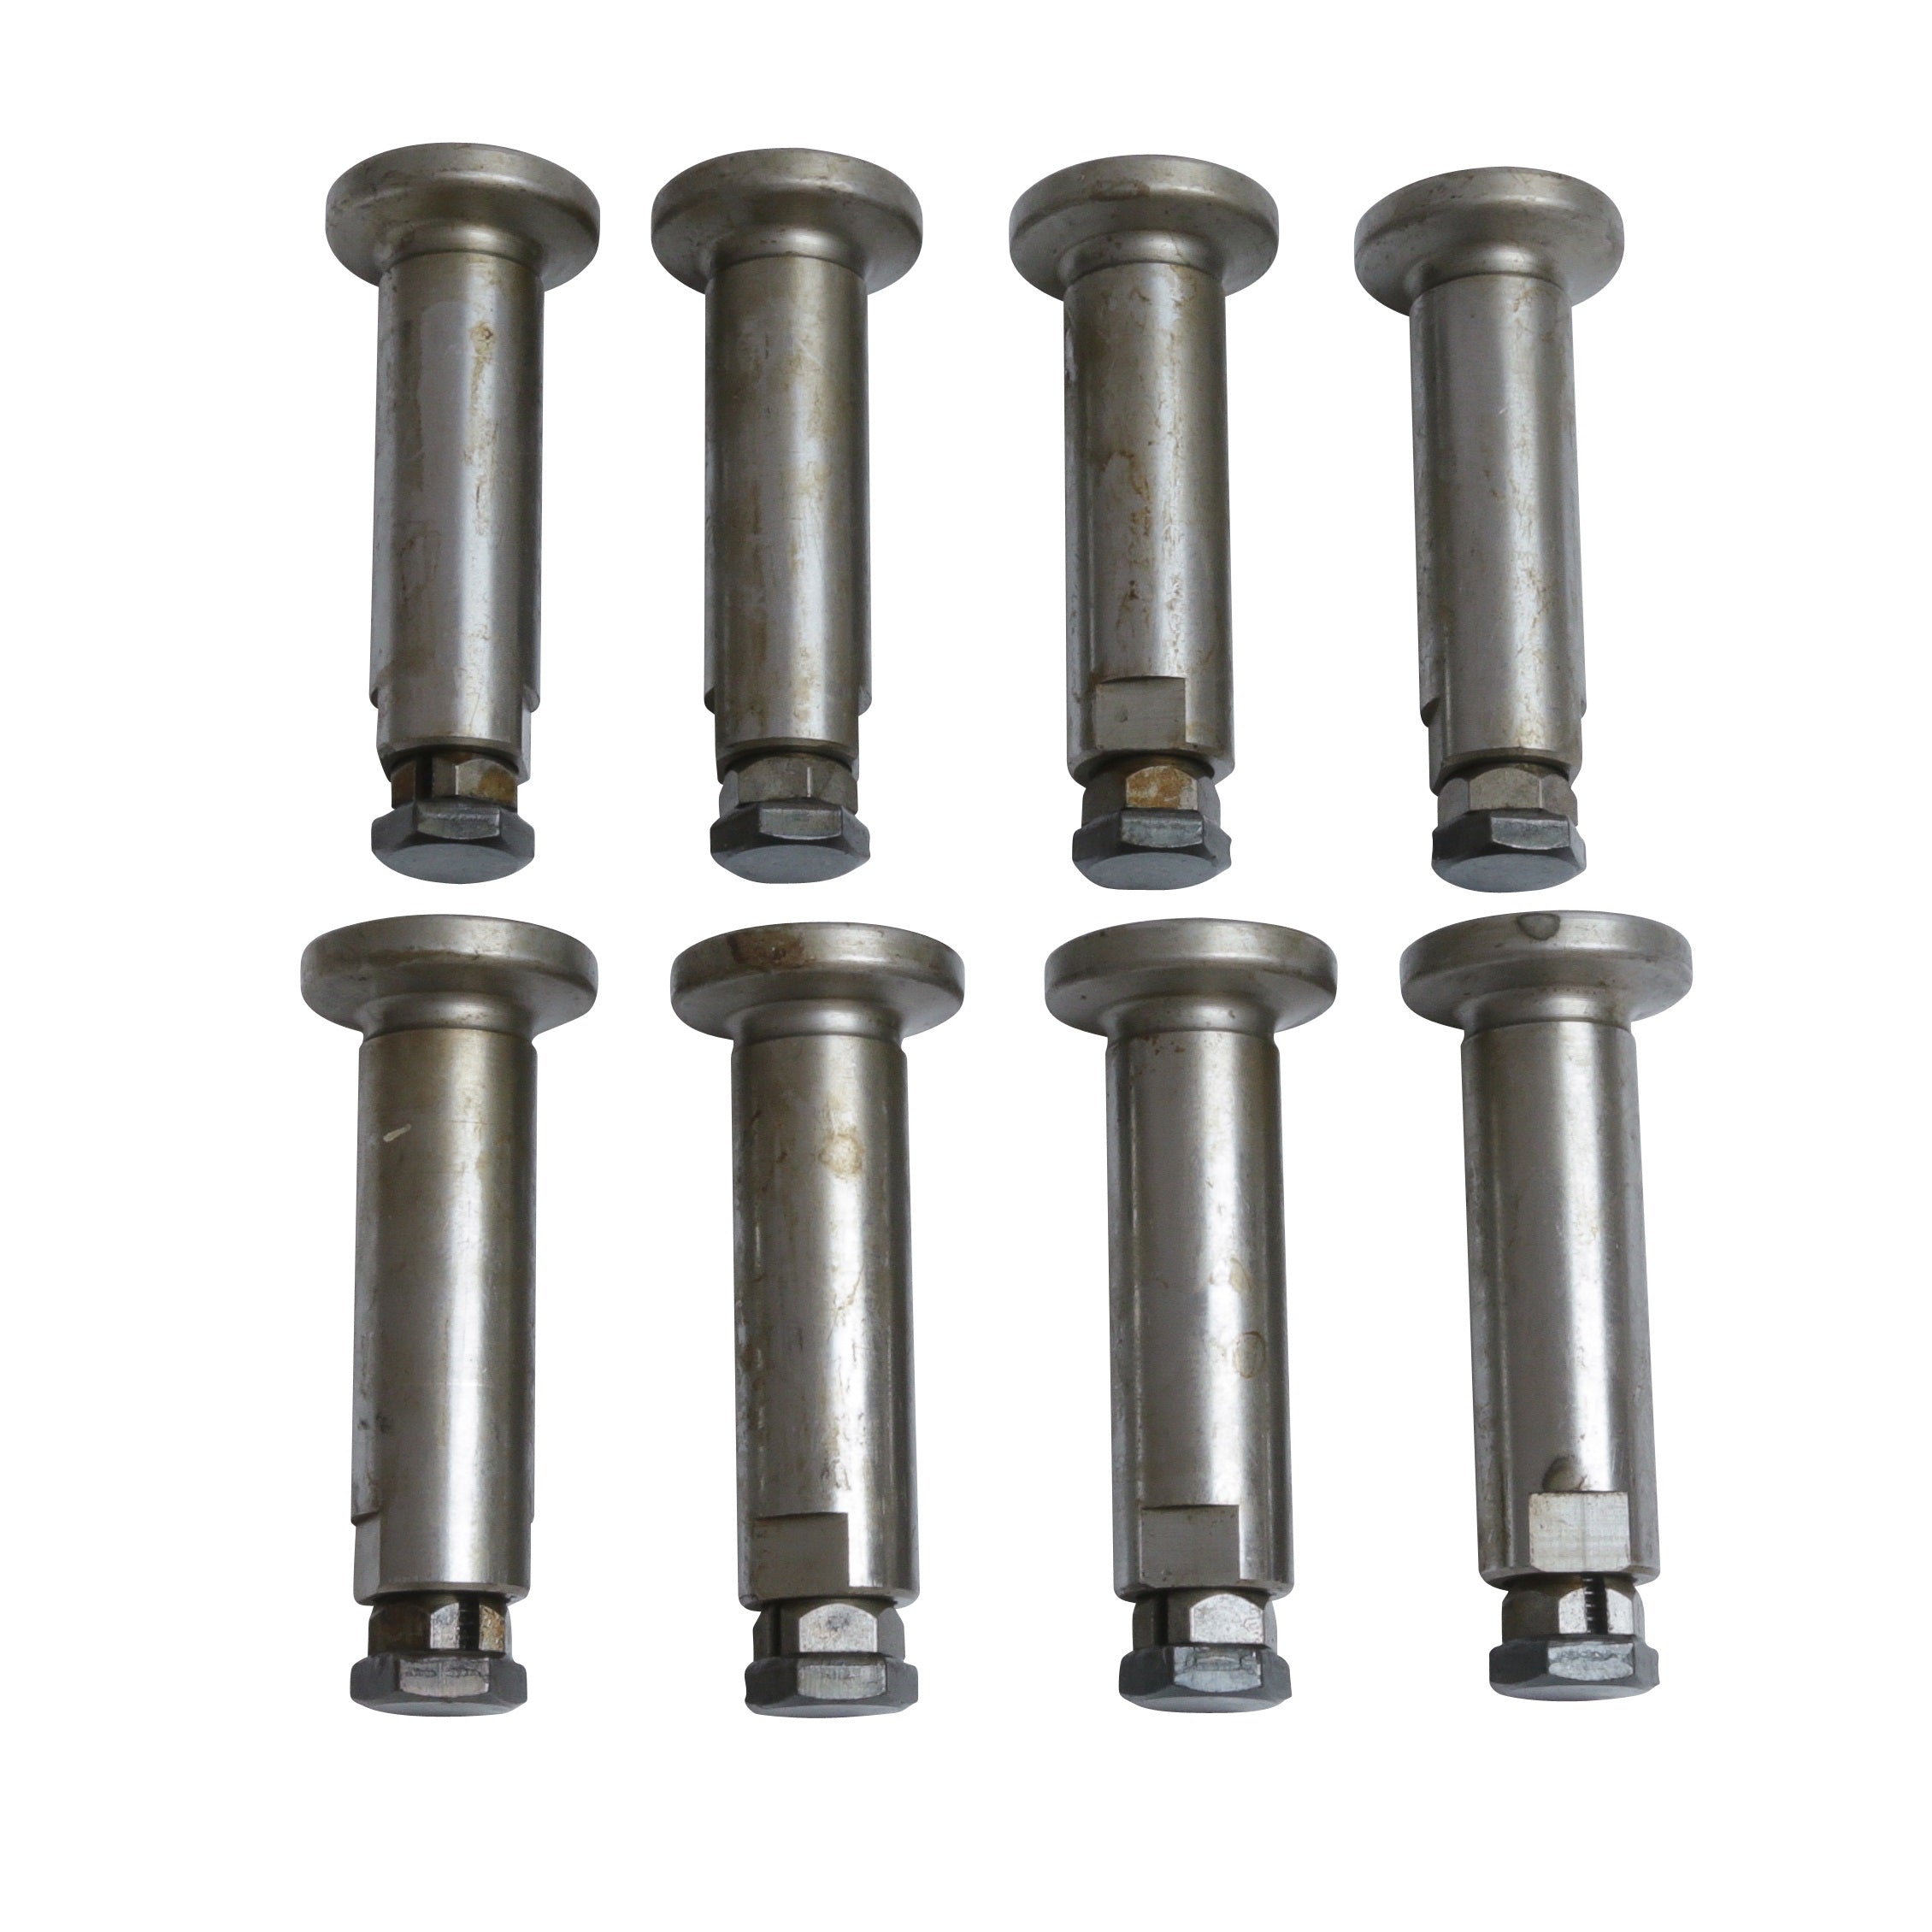 Tappets (Adjustable -Double-lock Style) • 1928-34 Ford